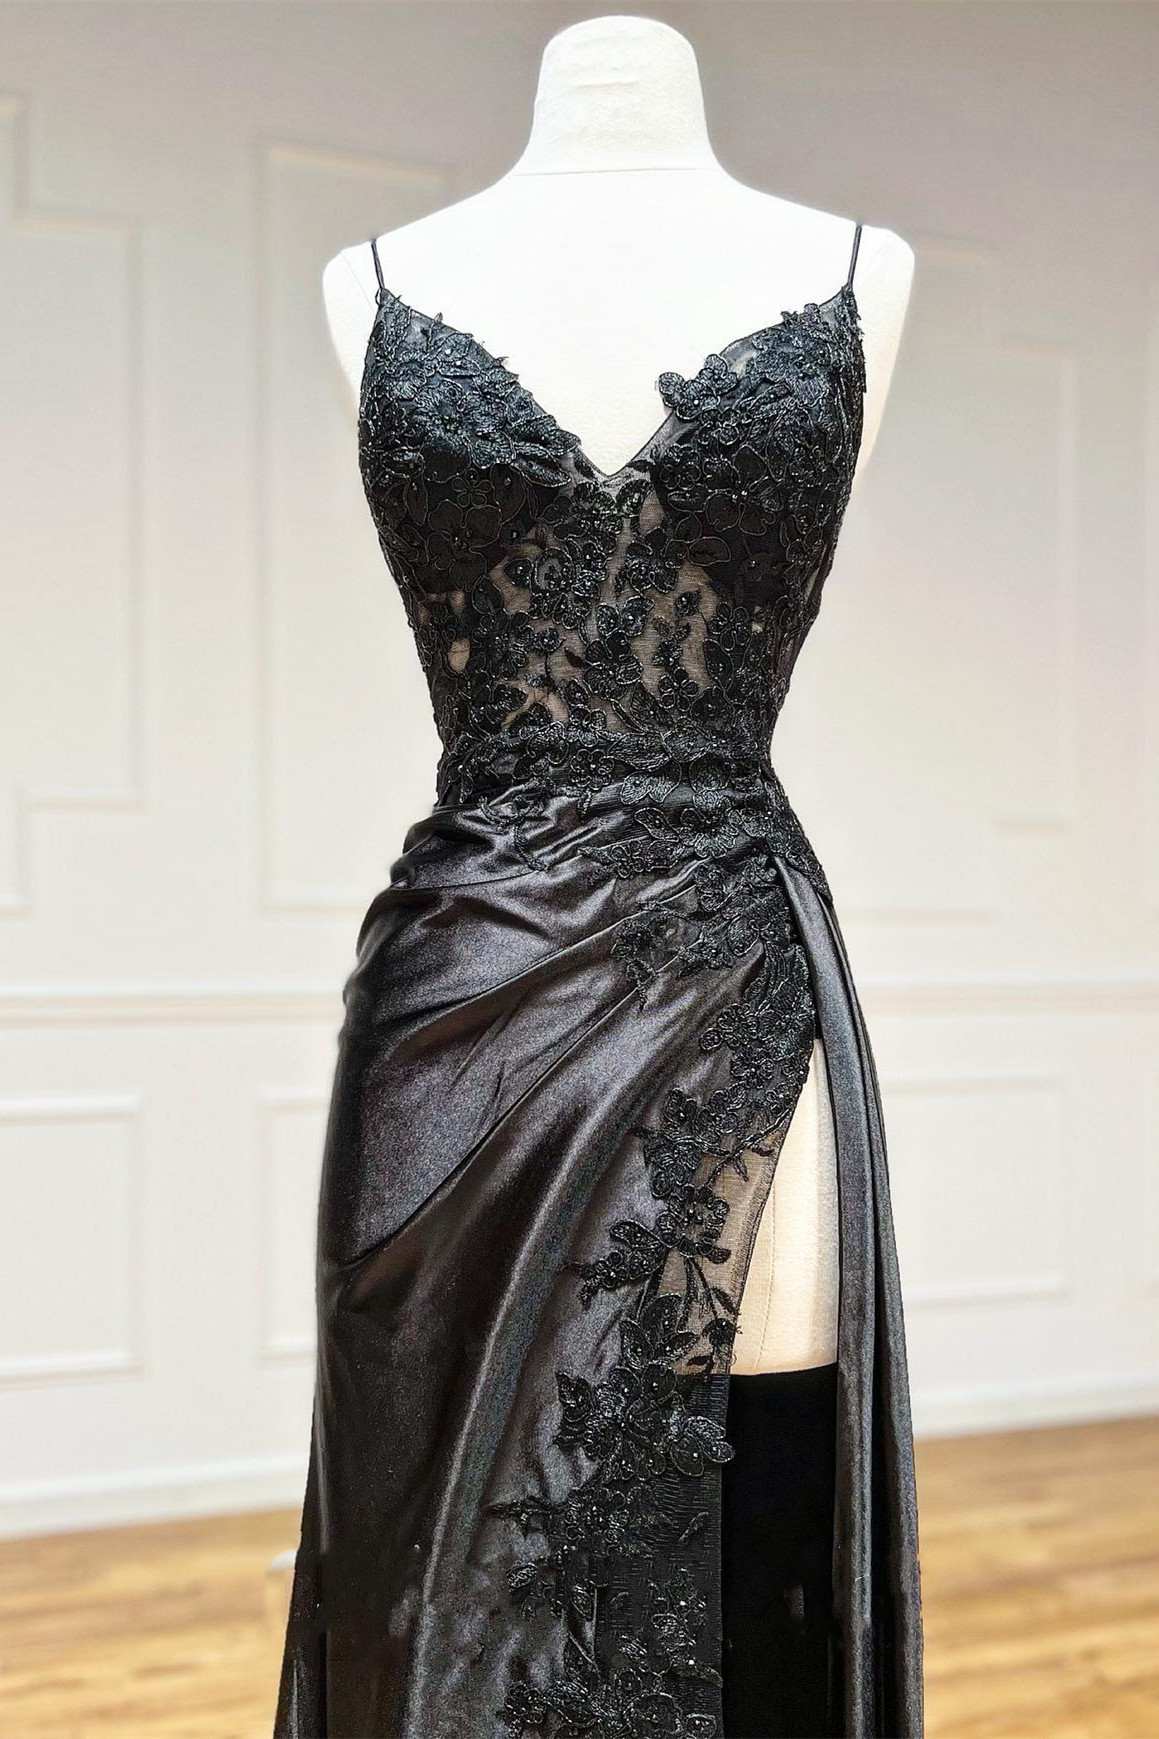 Black Beaded Sequin Lace Sleeveless A-line Ankle Length Prom Dresses,C –  clover sew